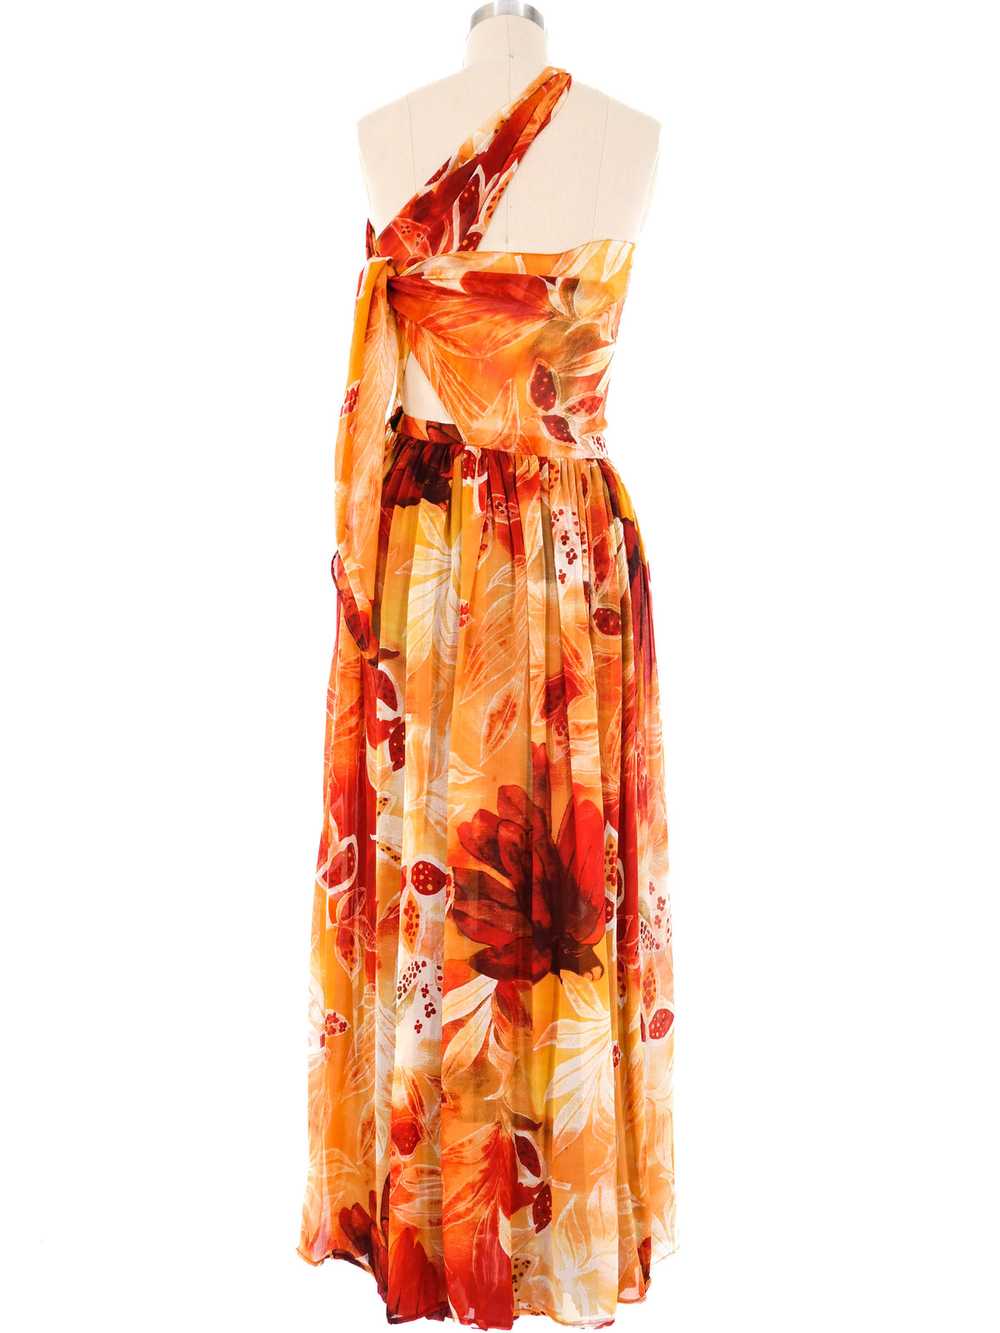 Valentino Floral Chiffon Wrap Gown - image 4